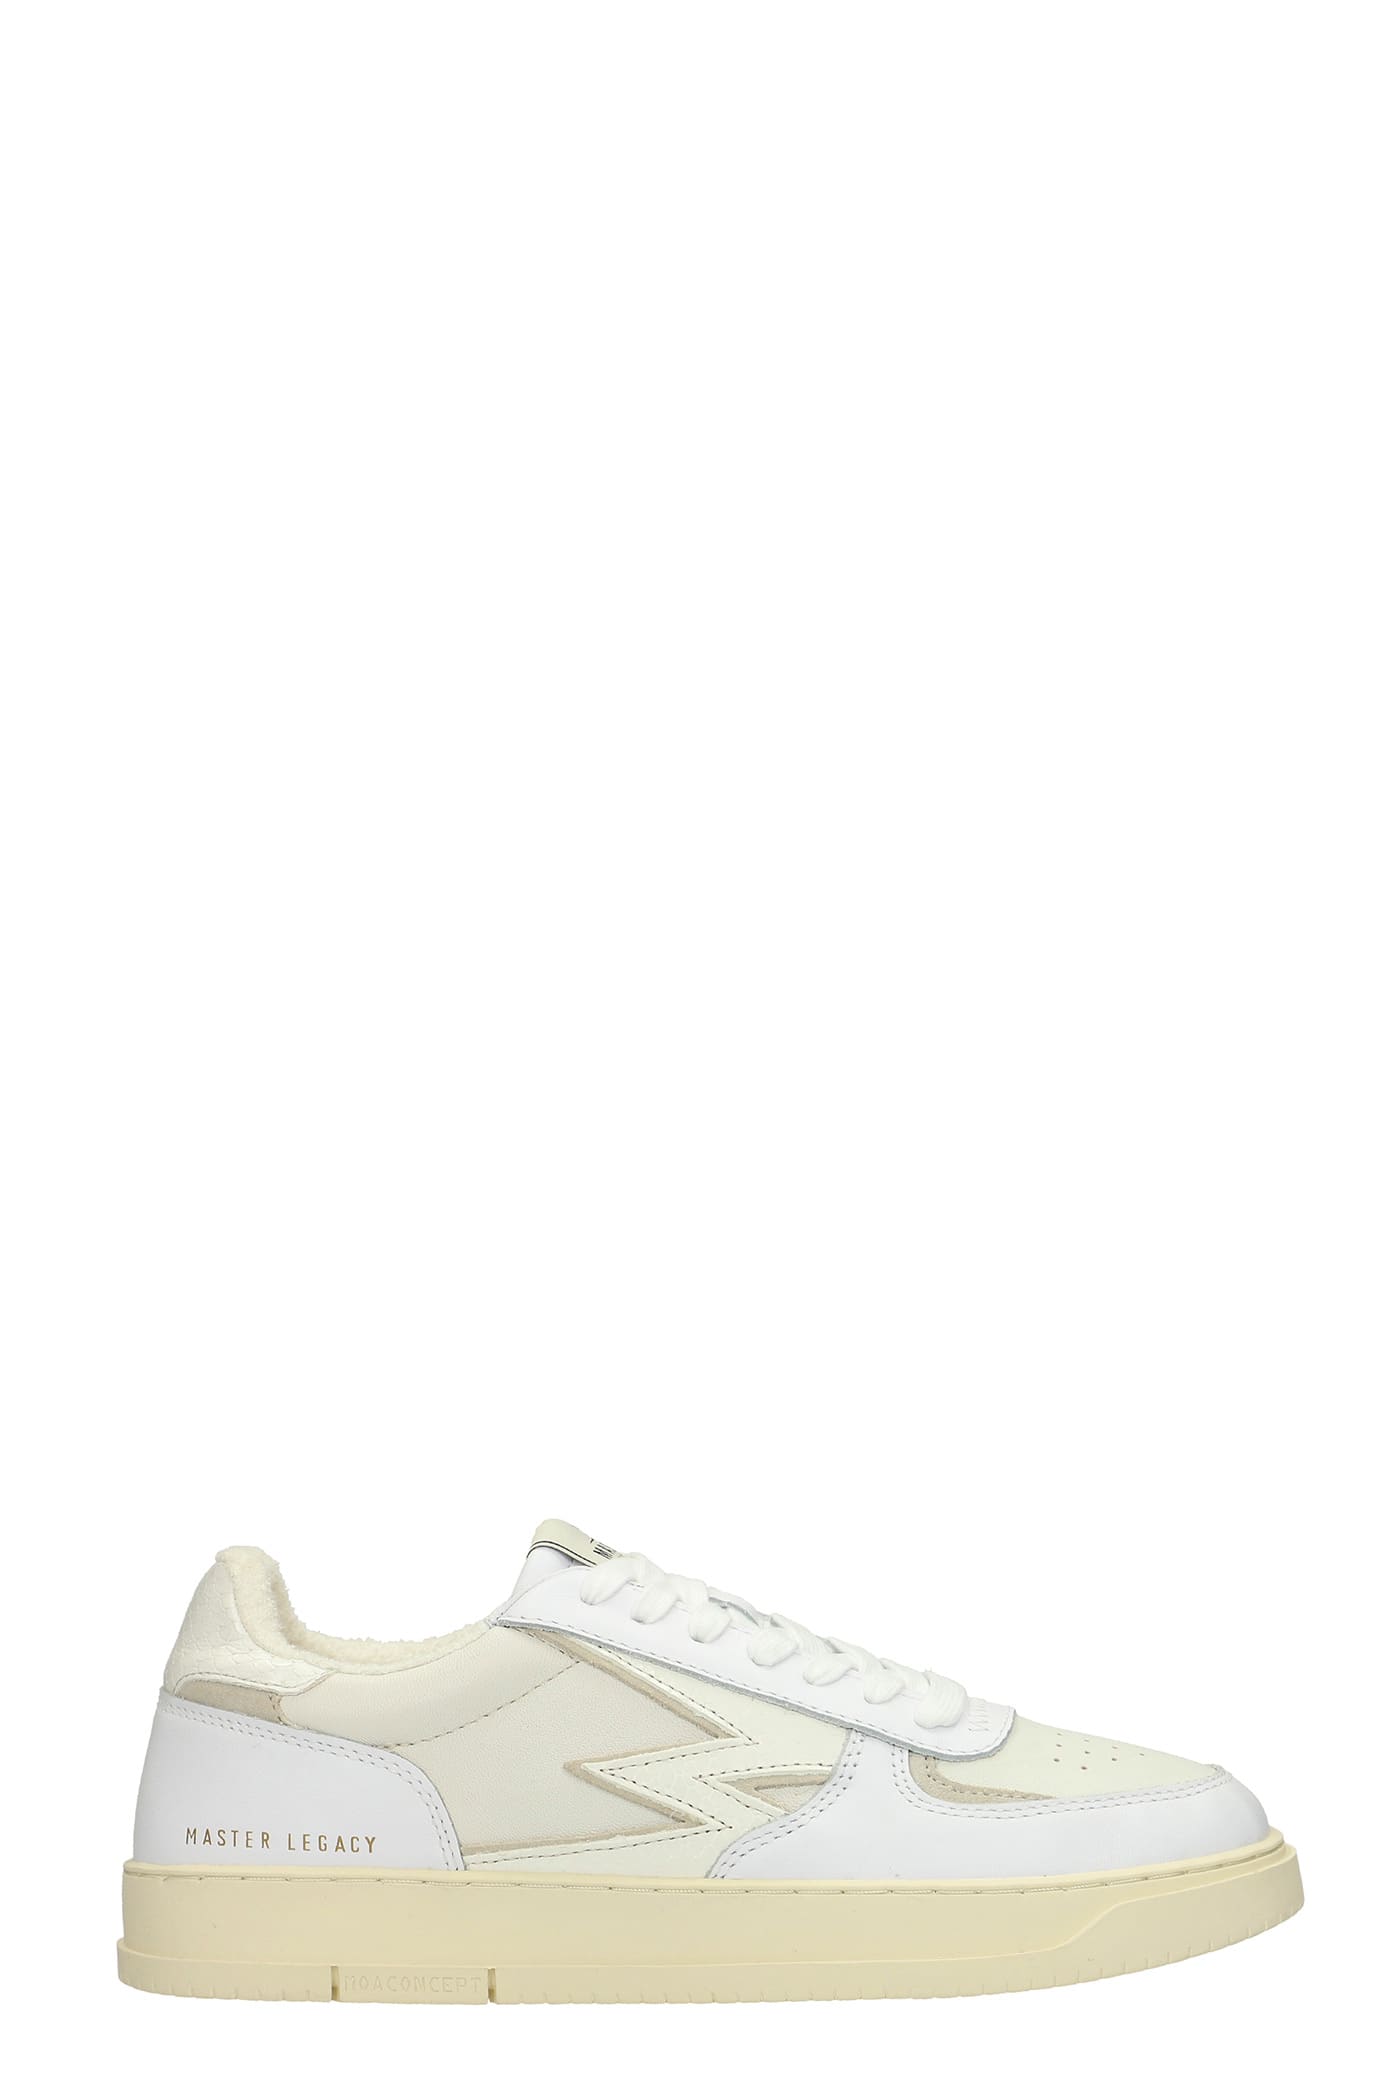 Moa Master Of Arts Sneakers In White Leather